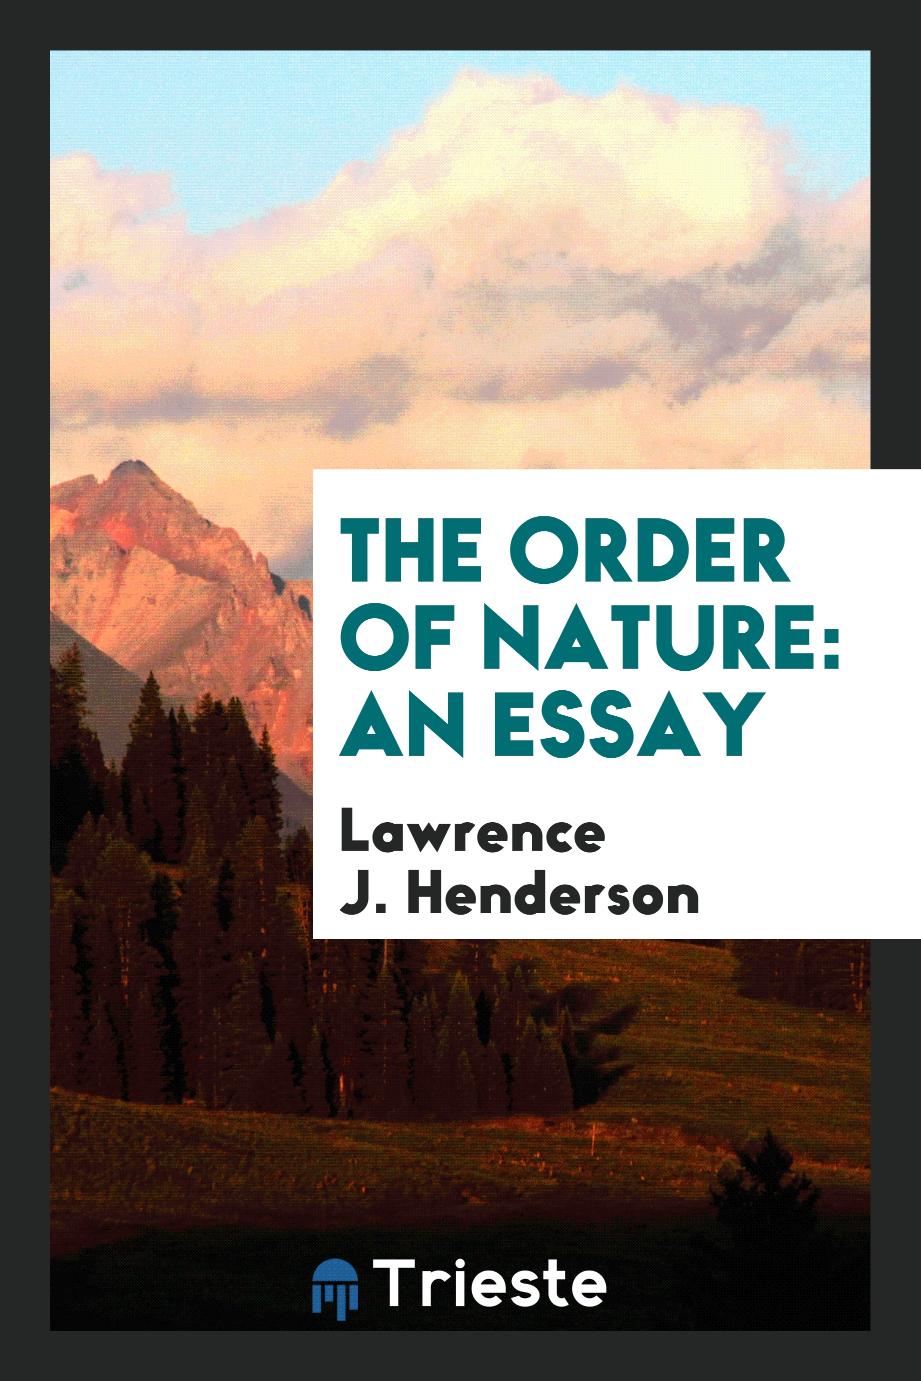 The order of nature: an essay